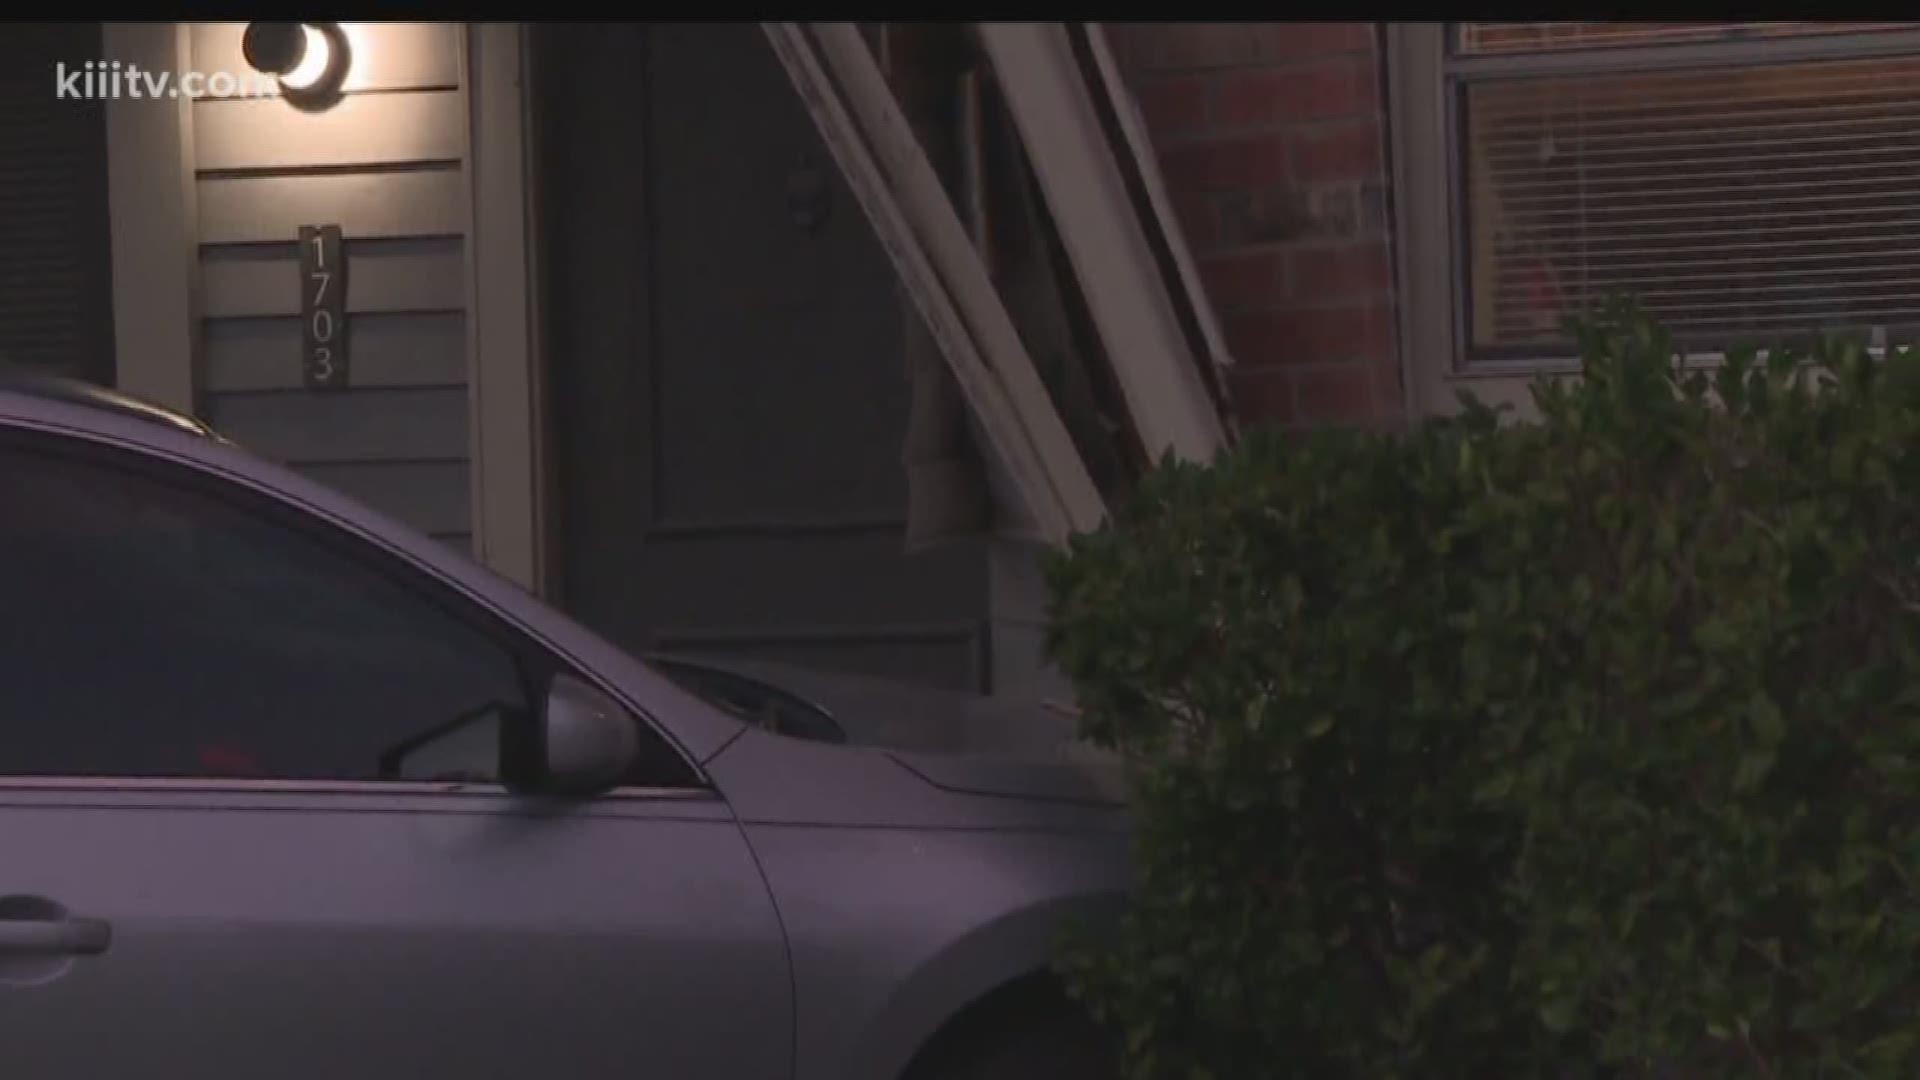 A woman was arrested Friday night after she crashed into an apartment complex on Everhart.